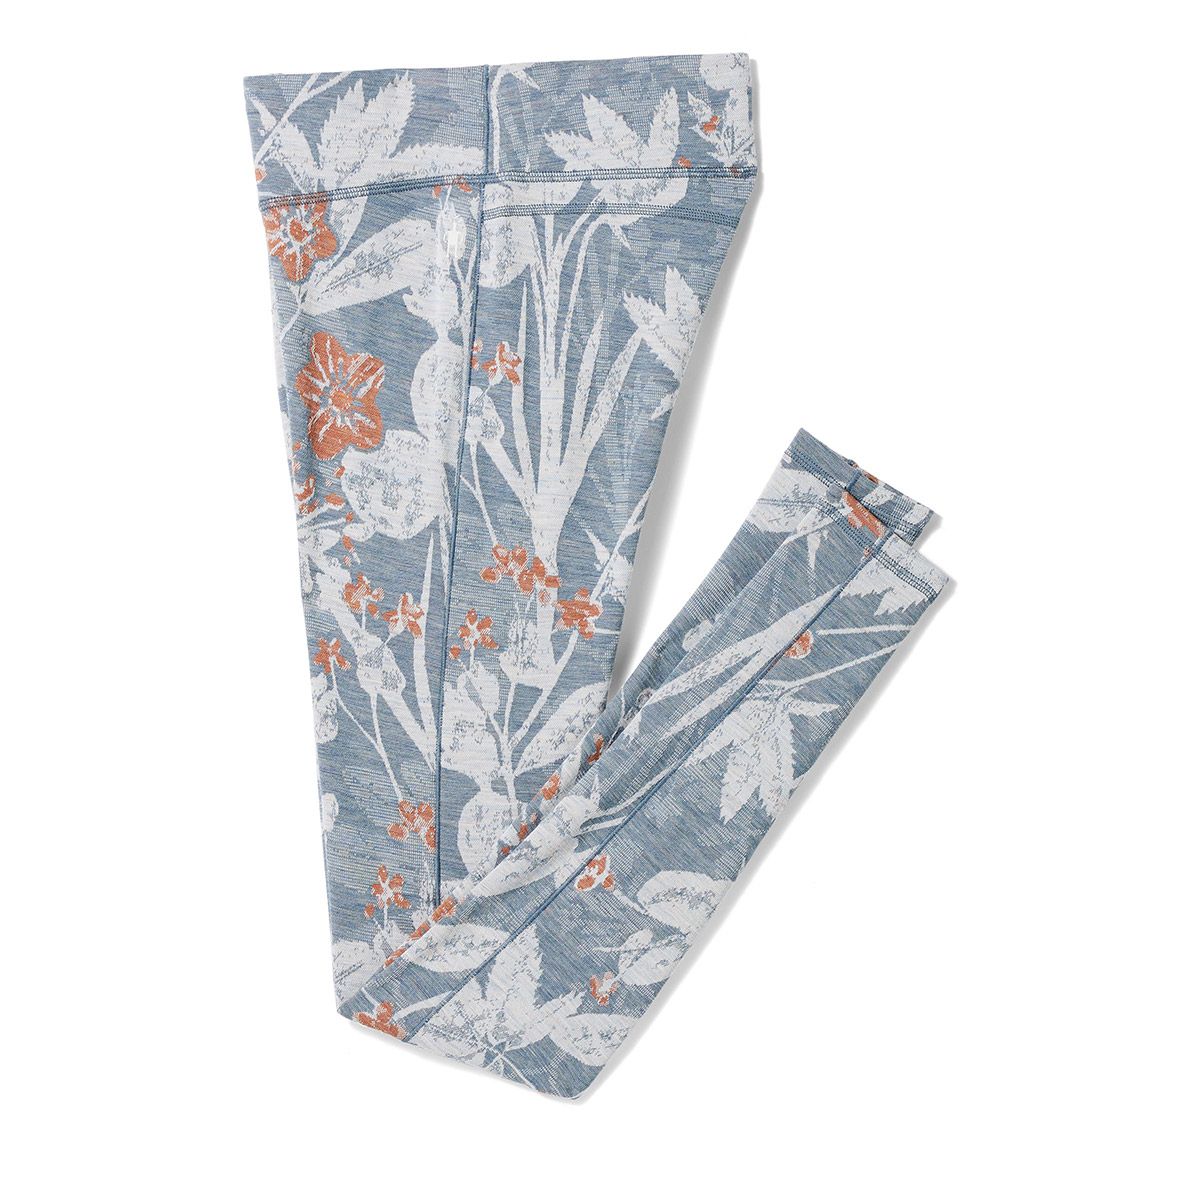 Women's Classic Thermal Merino Base Layer Bottom in Winter Sky Floral